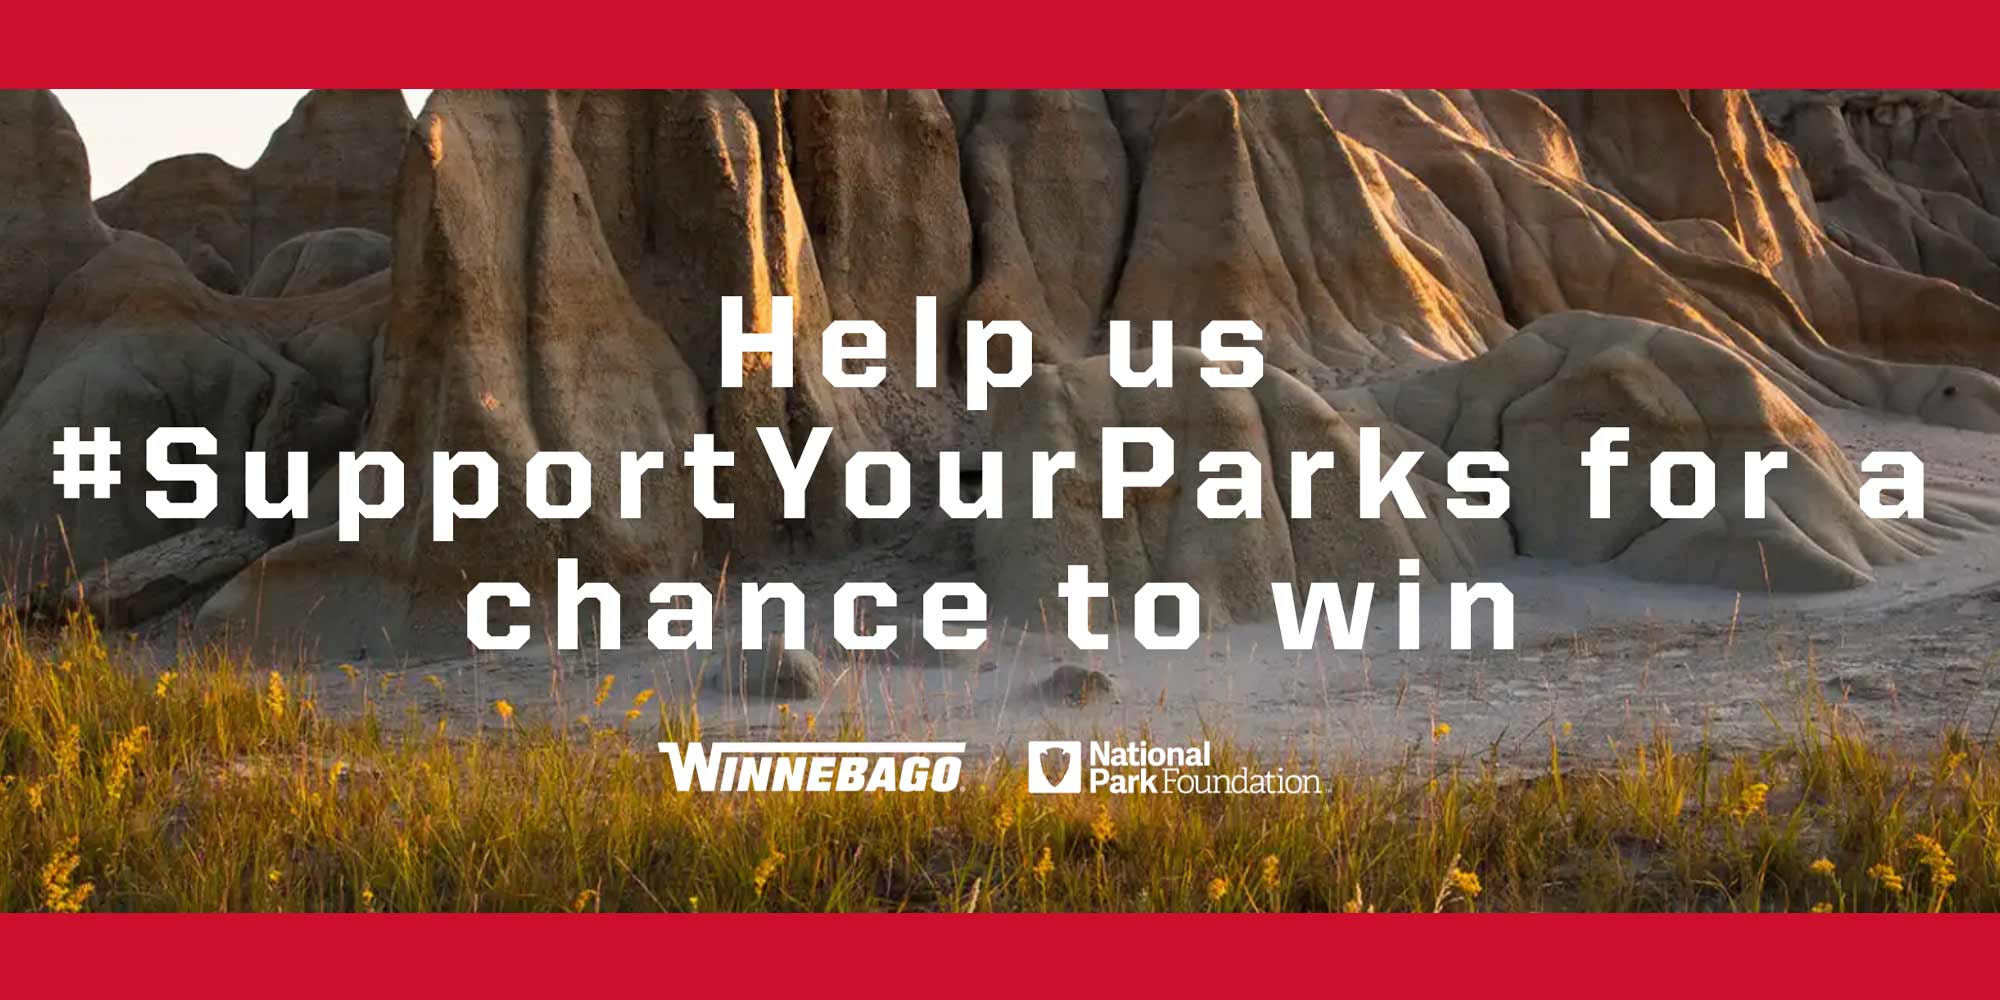 Winnebago supporting our National Parks